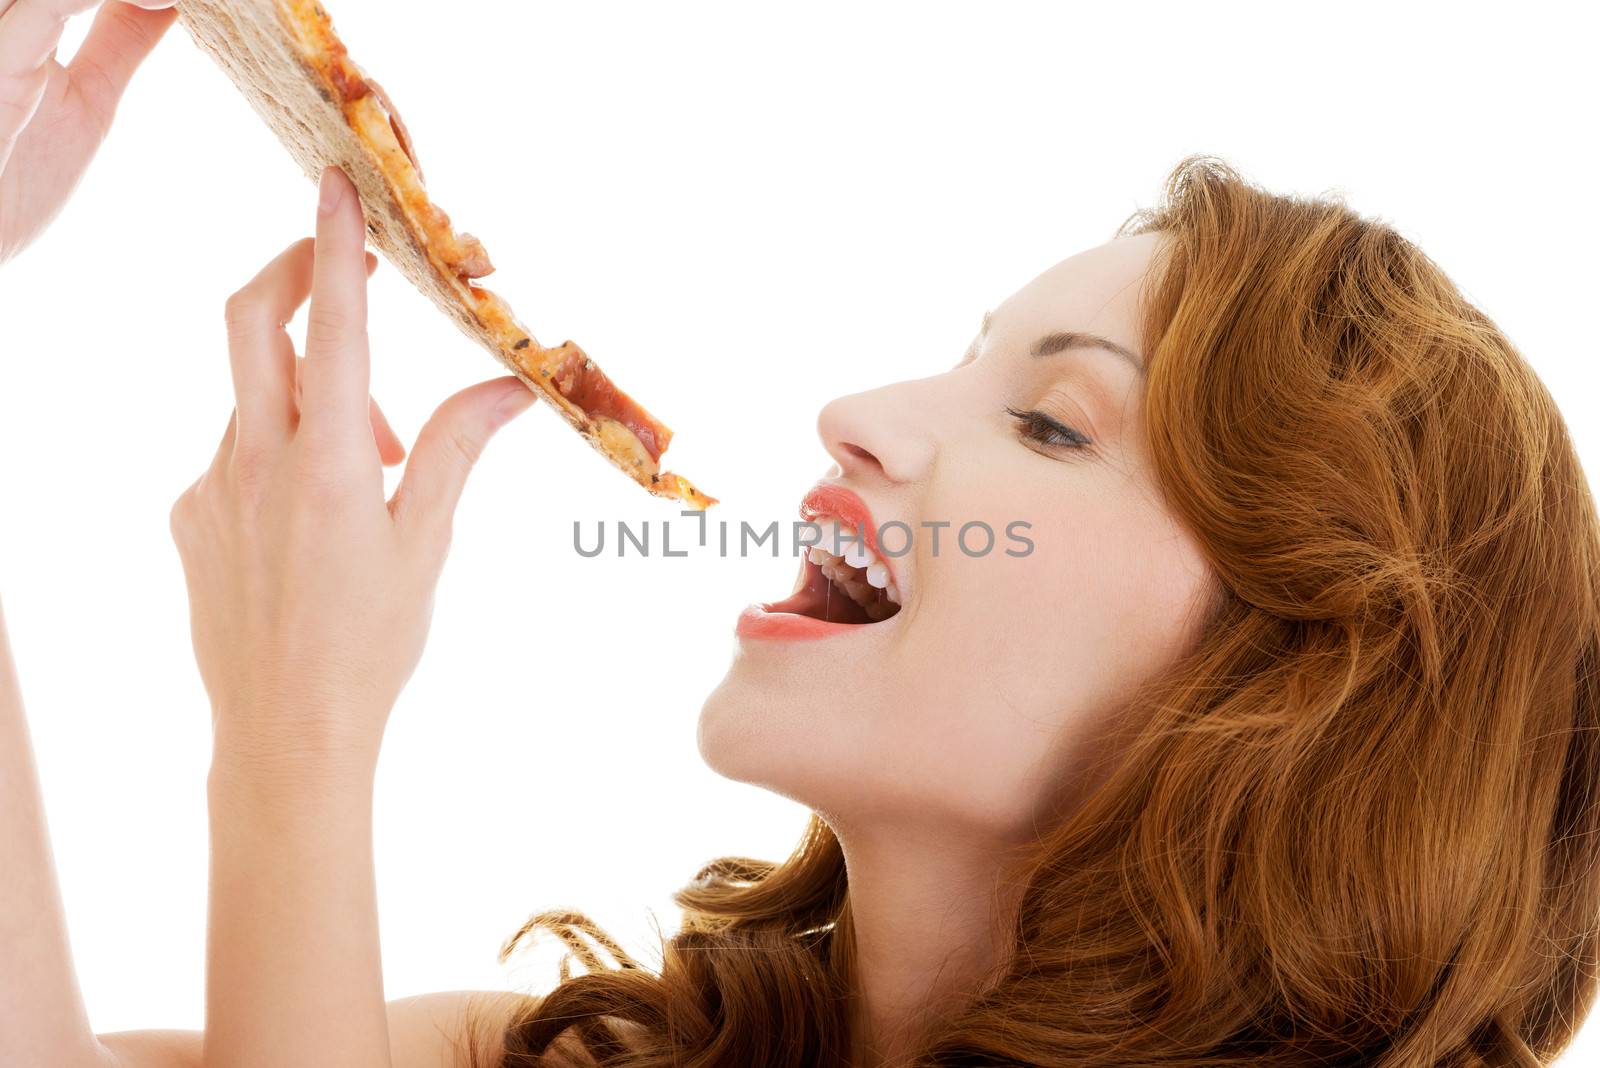 Happy woman eating pizza. Over white background.